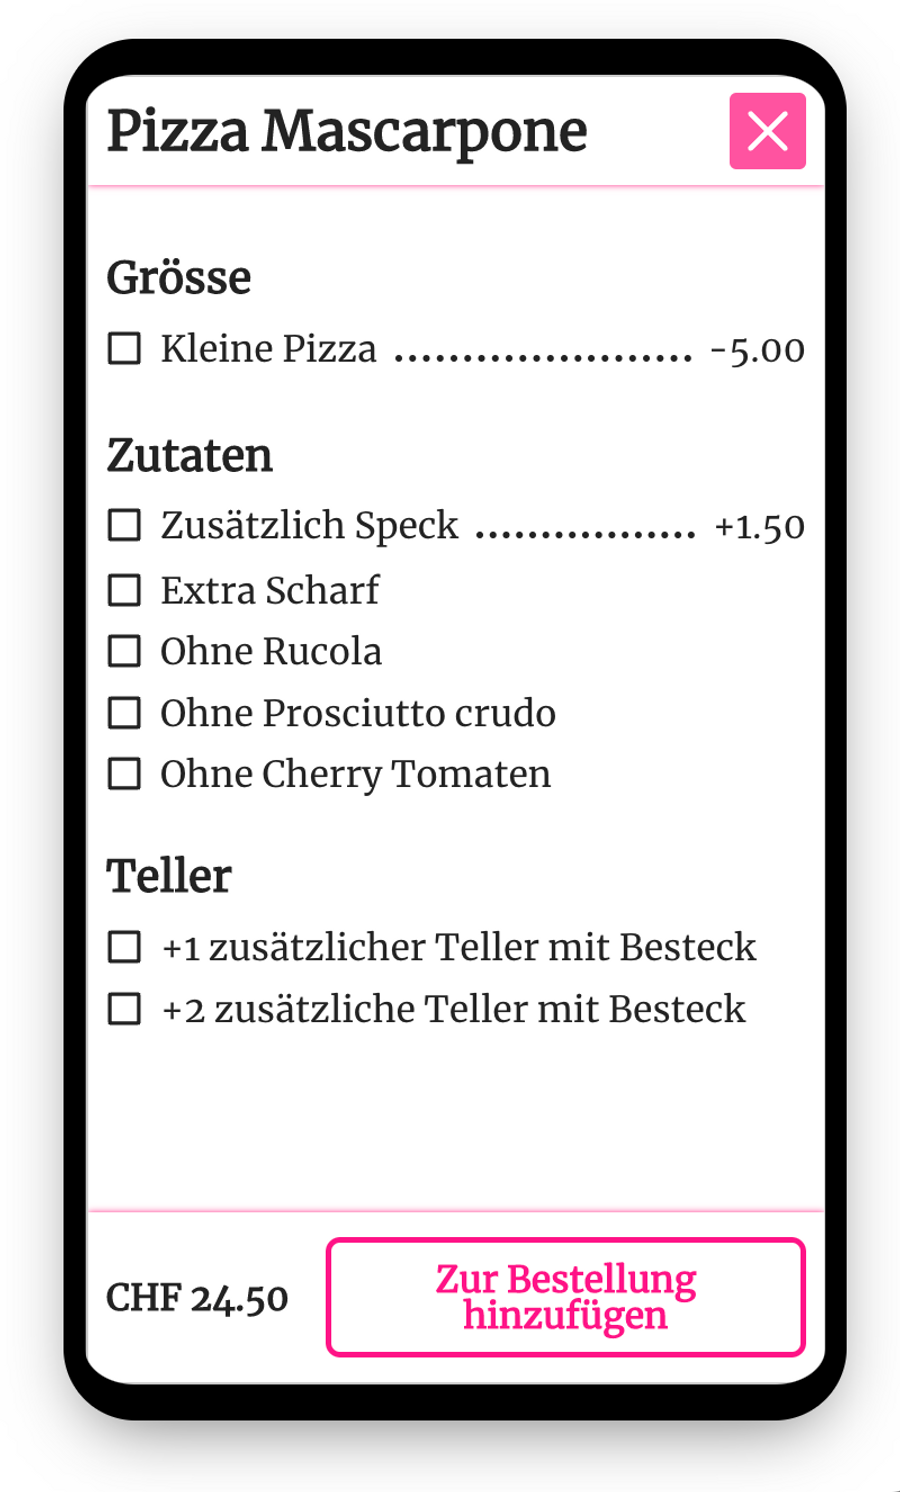 Options for a pizza. Small pizza, more ingredients, more plates